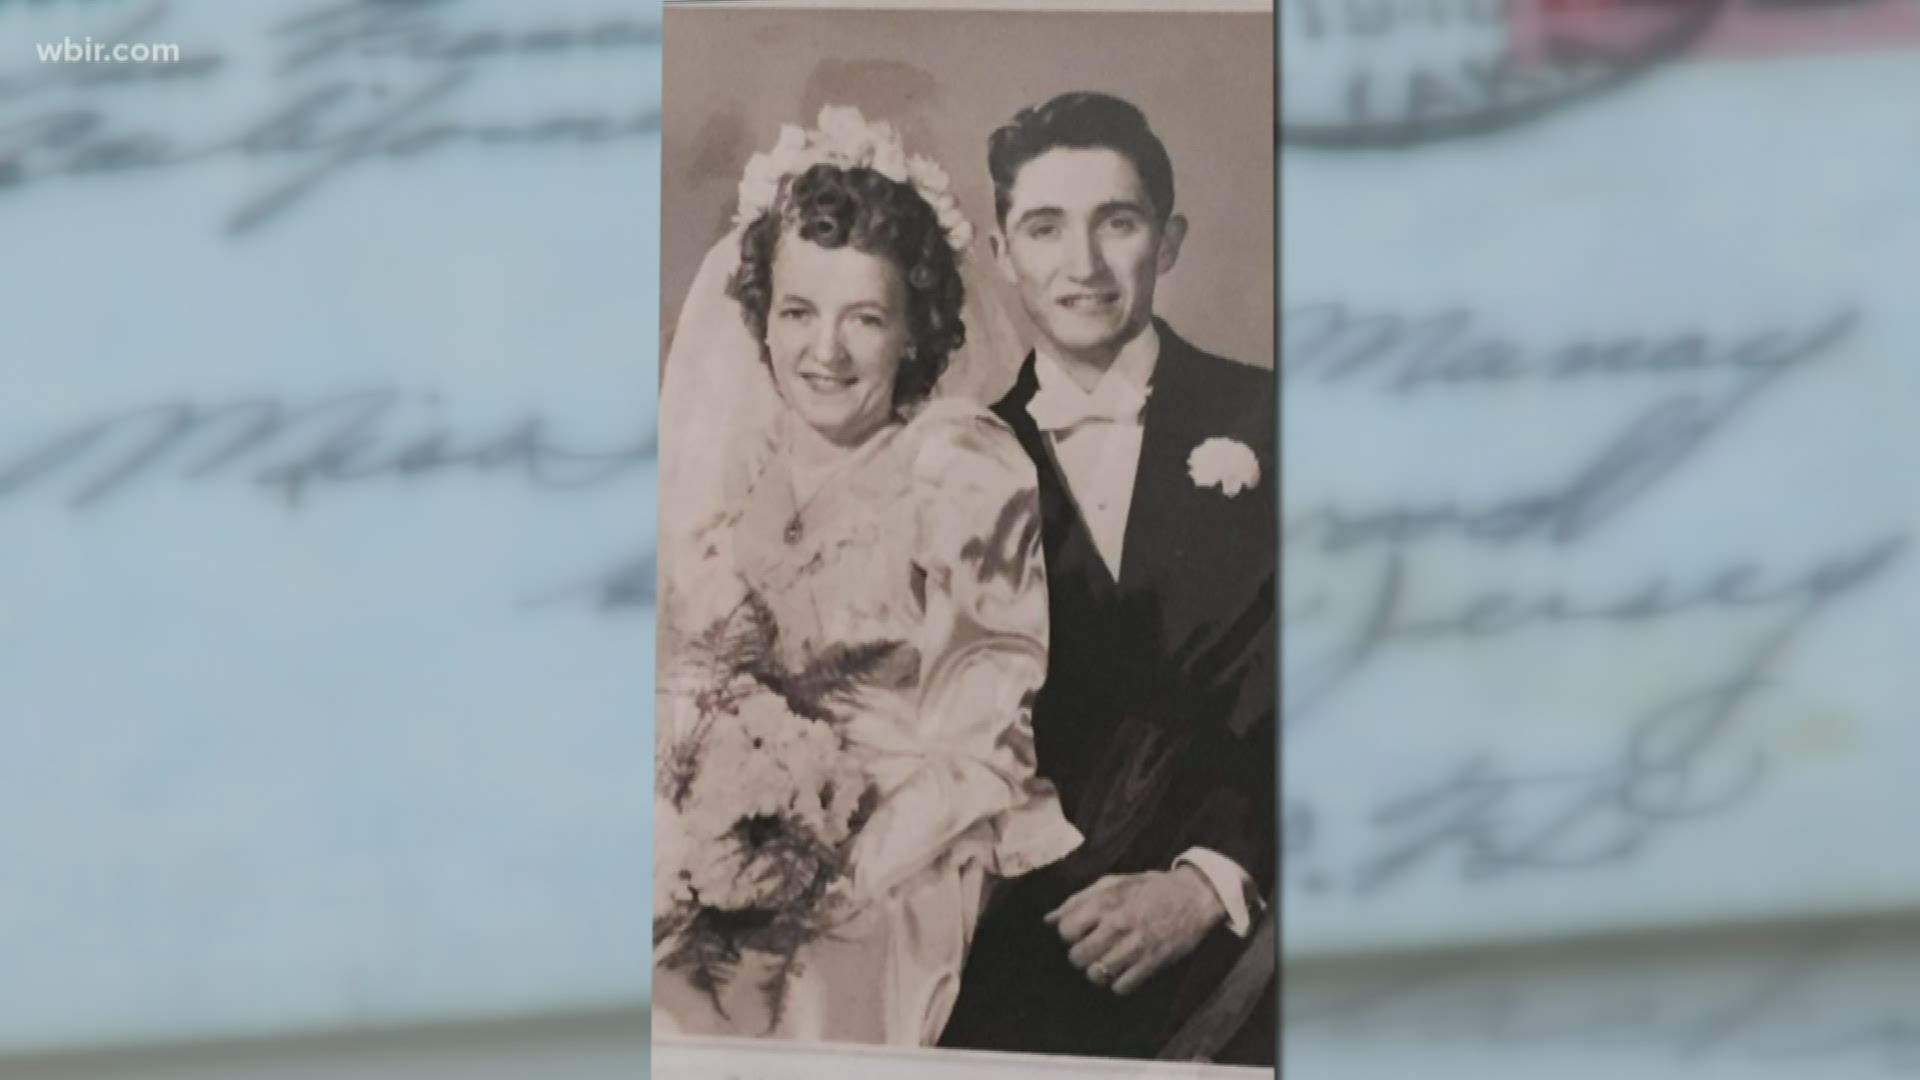 Two women found nearly a dozen hand-written world war two love letters in a Sevierville knife shop. Now they're now working to make sure the priceless pieces of history end up in the right hands.